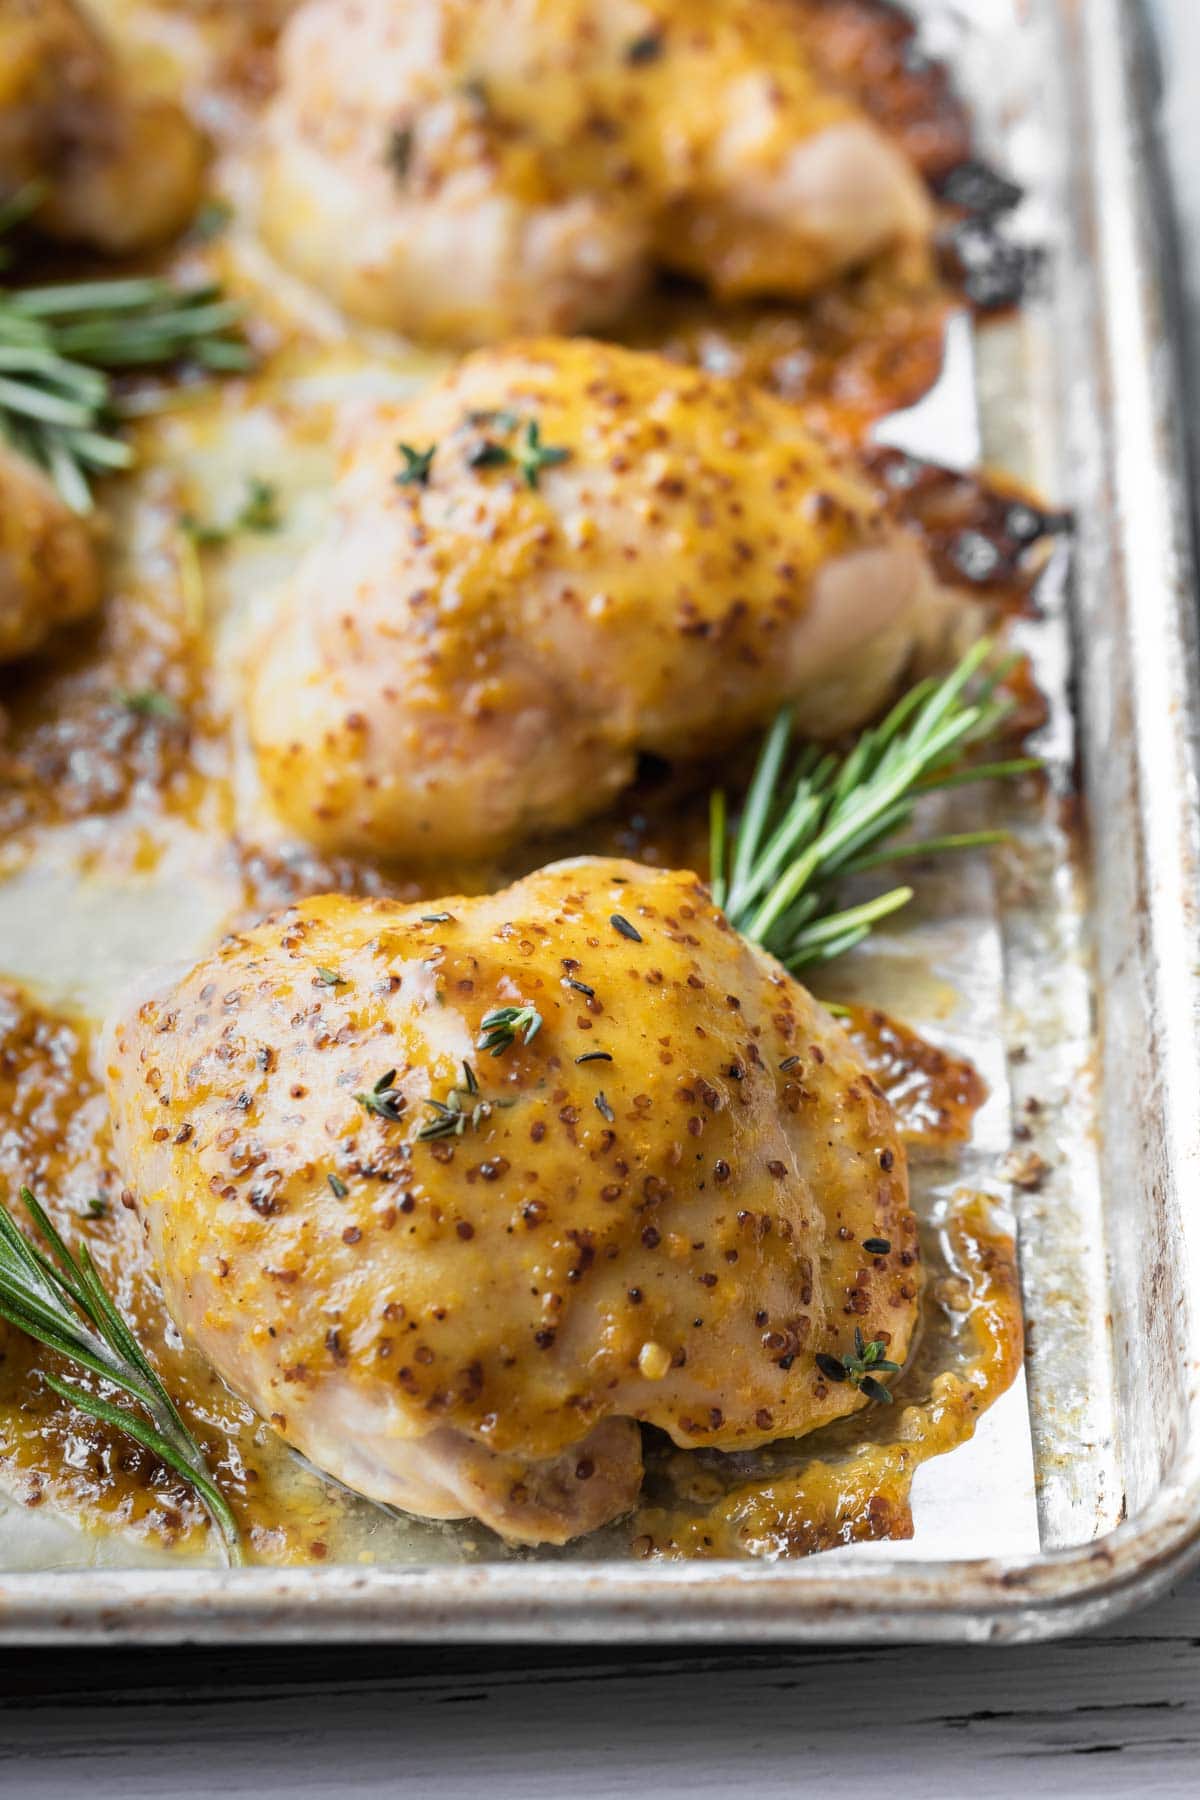 Baked Honey Mustard Chicken Thighs Simply Whisked,How To Make Ribs On The Grill Tender